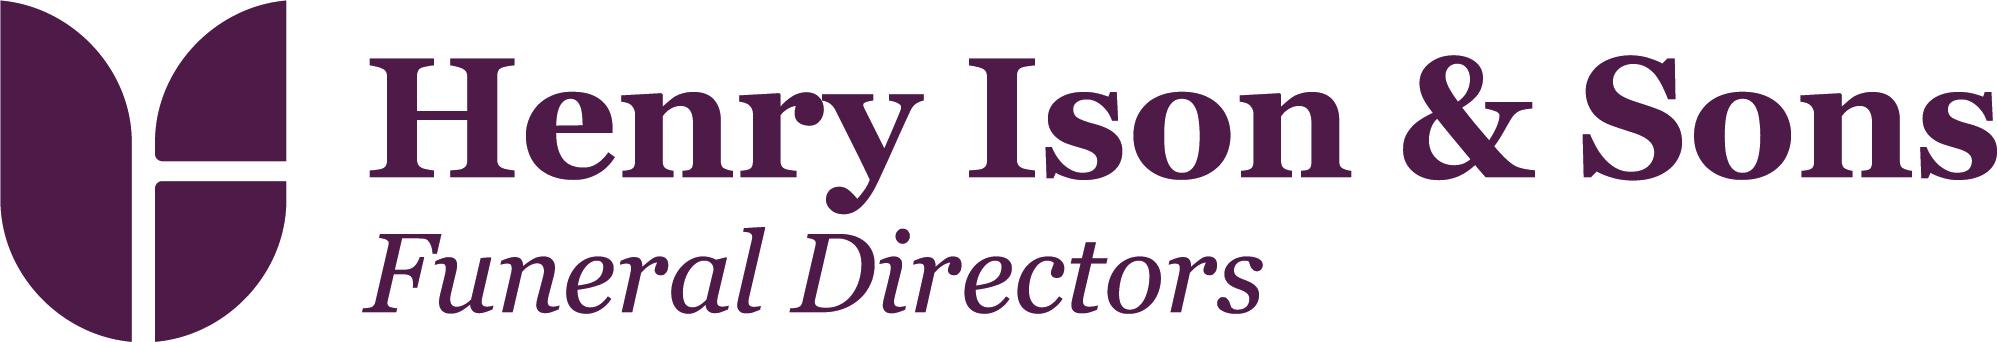 Henry Ison & Sons Funeral Directors logo Henry Ison & Sons Funeral Directors  and Memorial Masonry Specialist Coventry 02475 263665